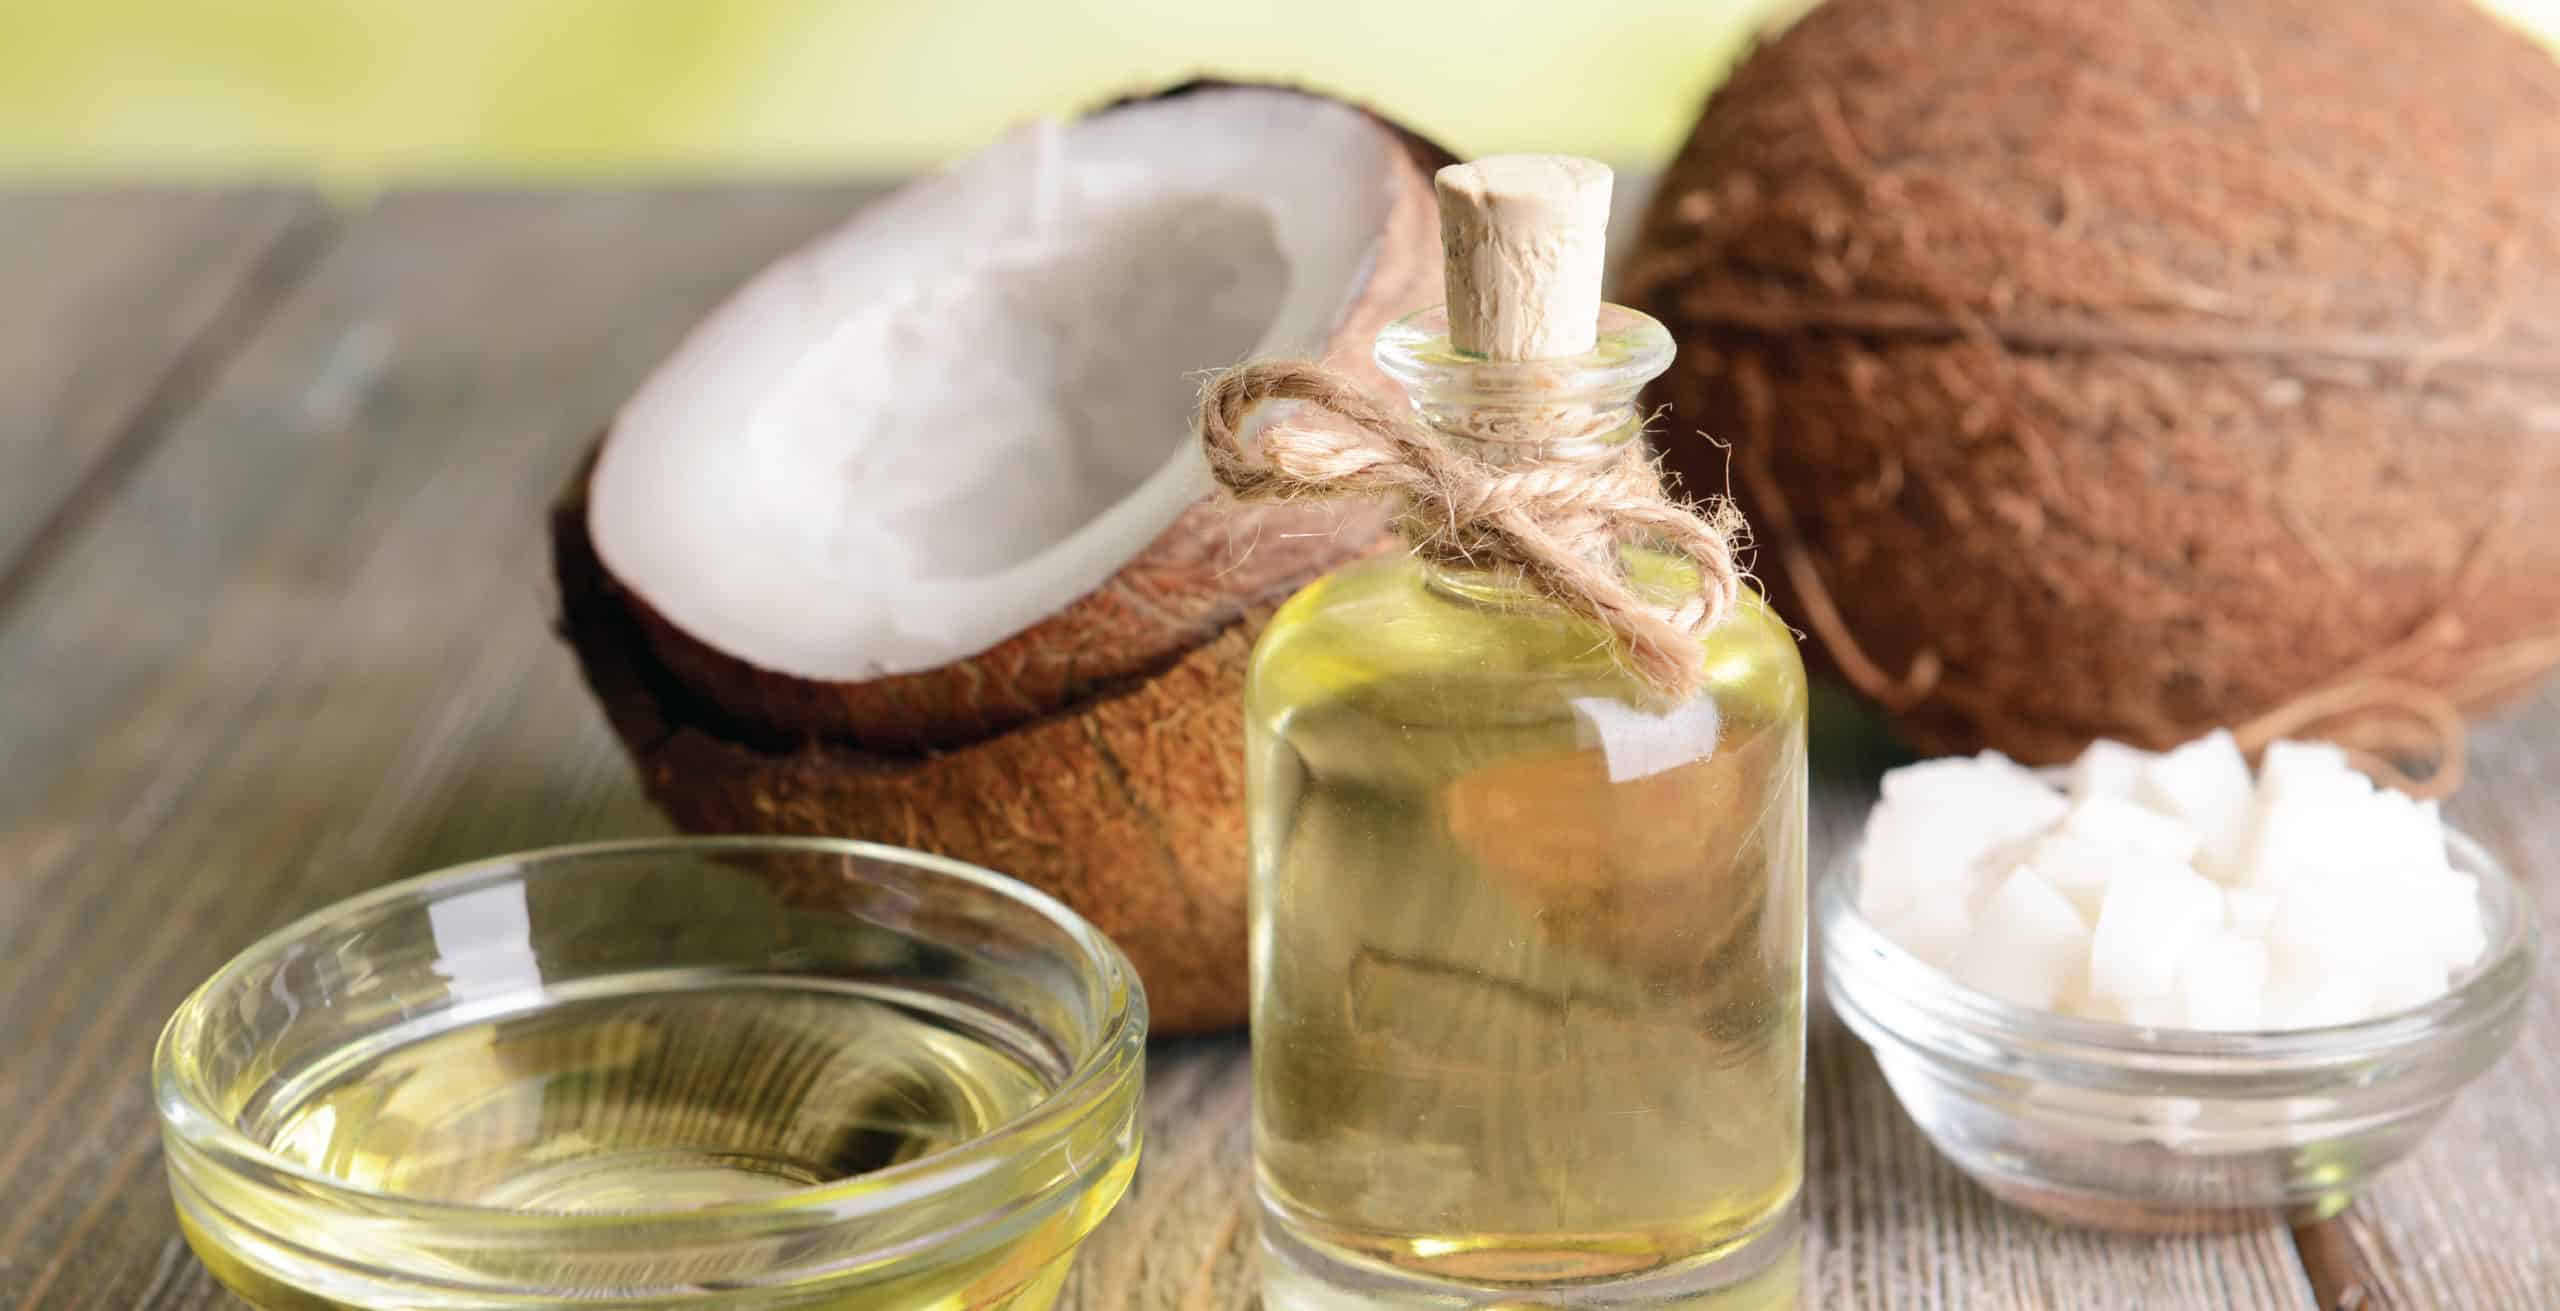 How to Use Coconut Oil for Face: Benefits and Uses  Coconut oil for face,  Apply coconut oil, Skin moisturizer face